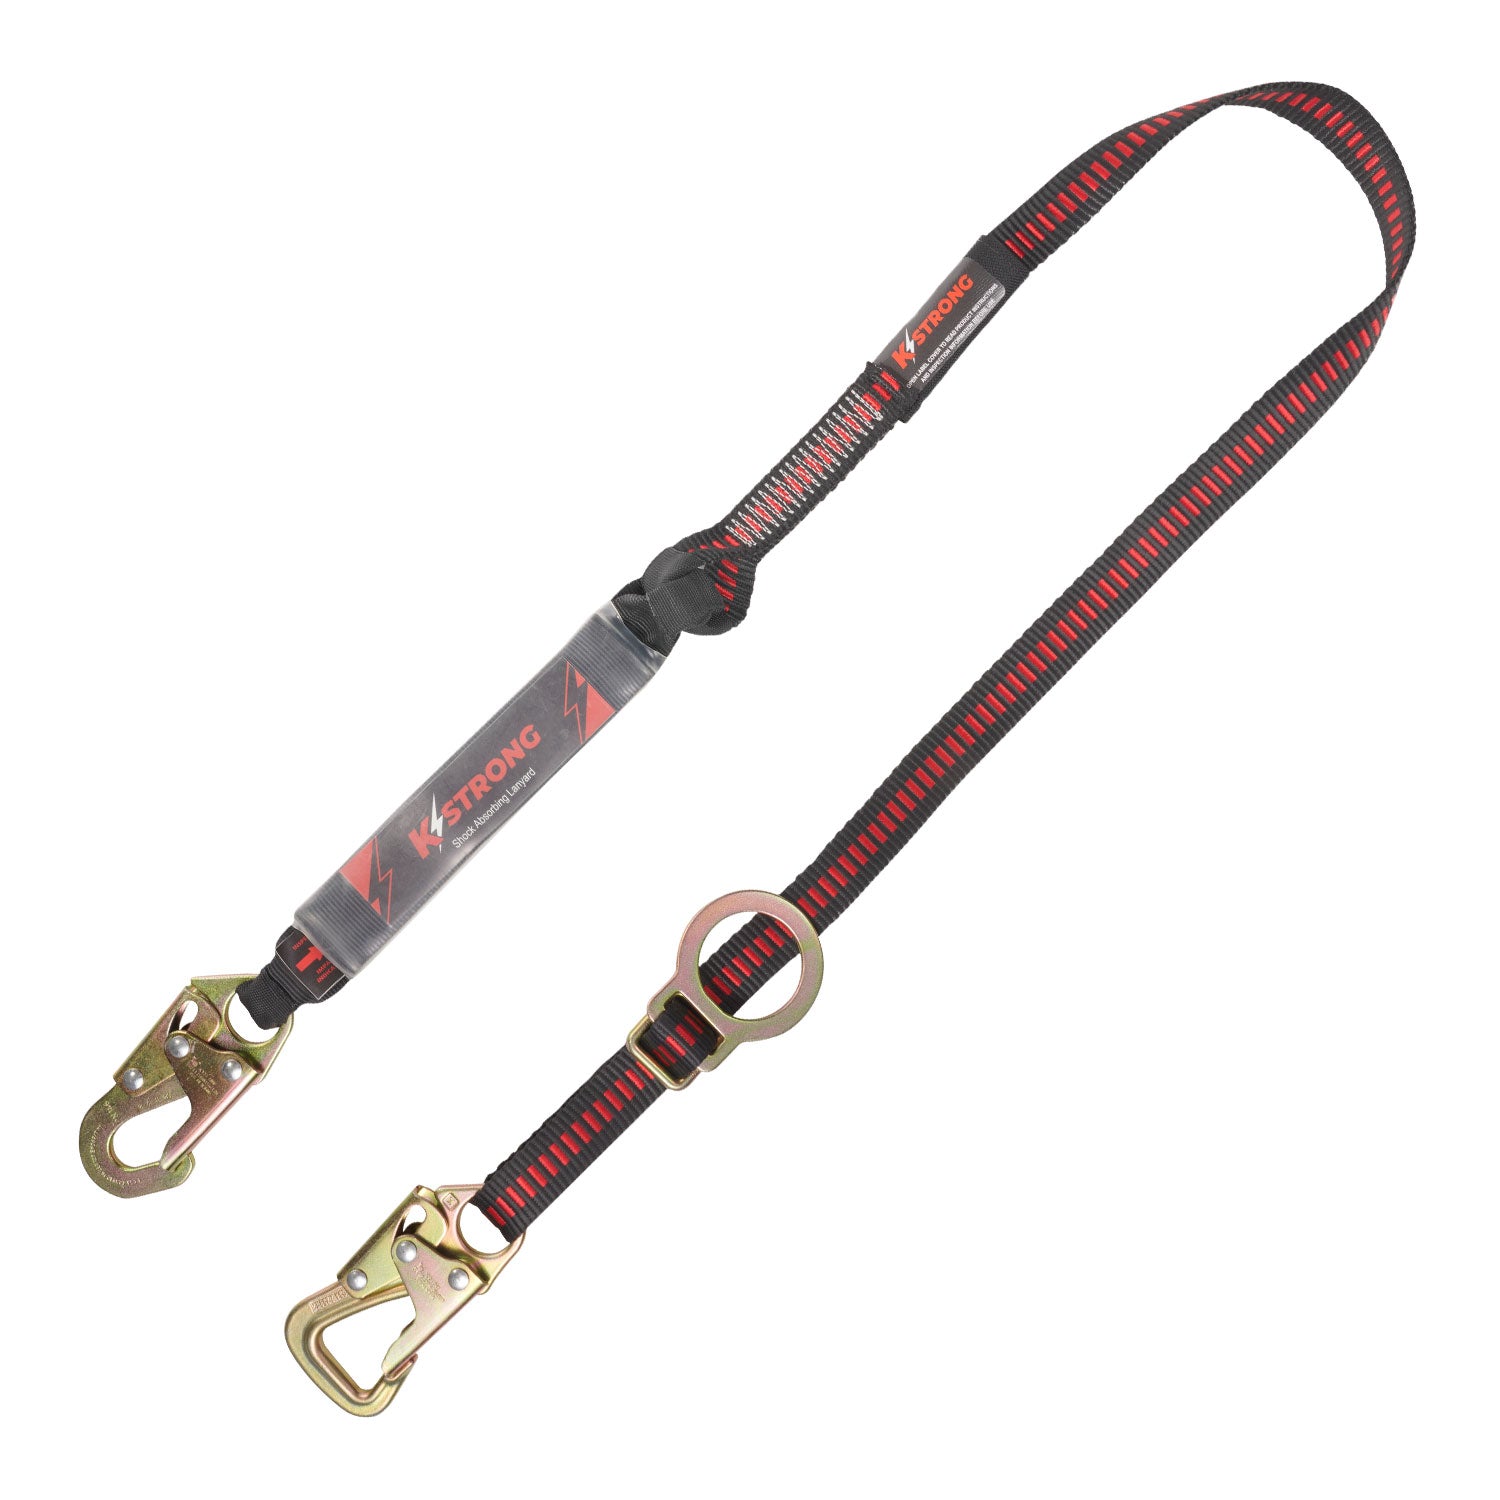 KStrong 6 ft. Tie-back SAL with Sliding D-ring, Snap Hook and Tie-back Hook (each)